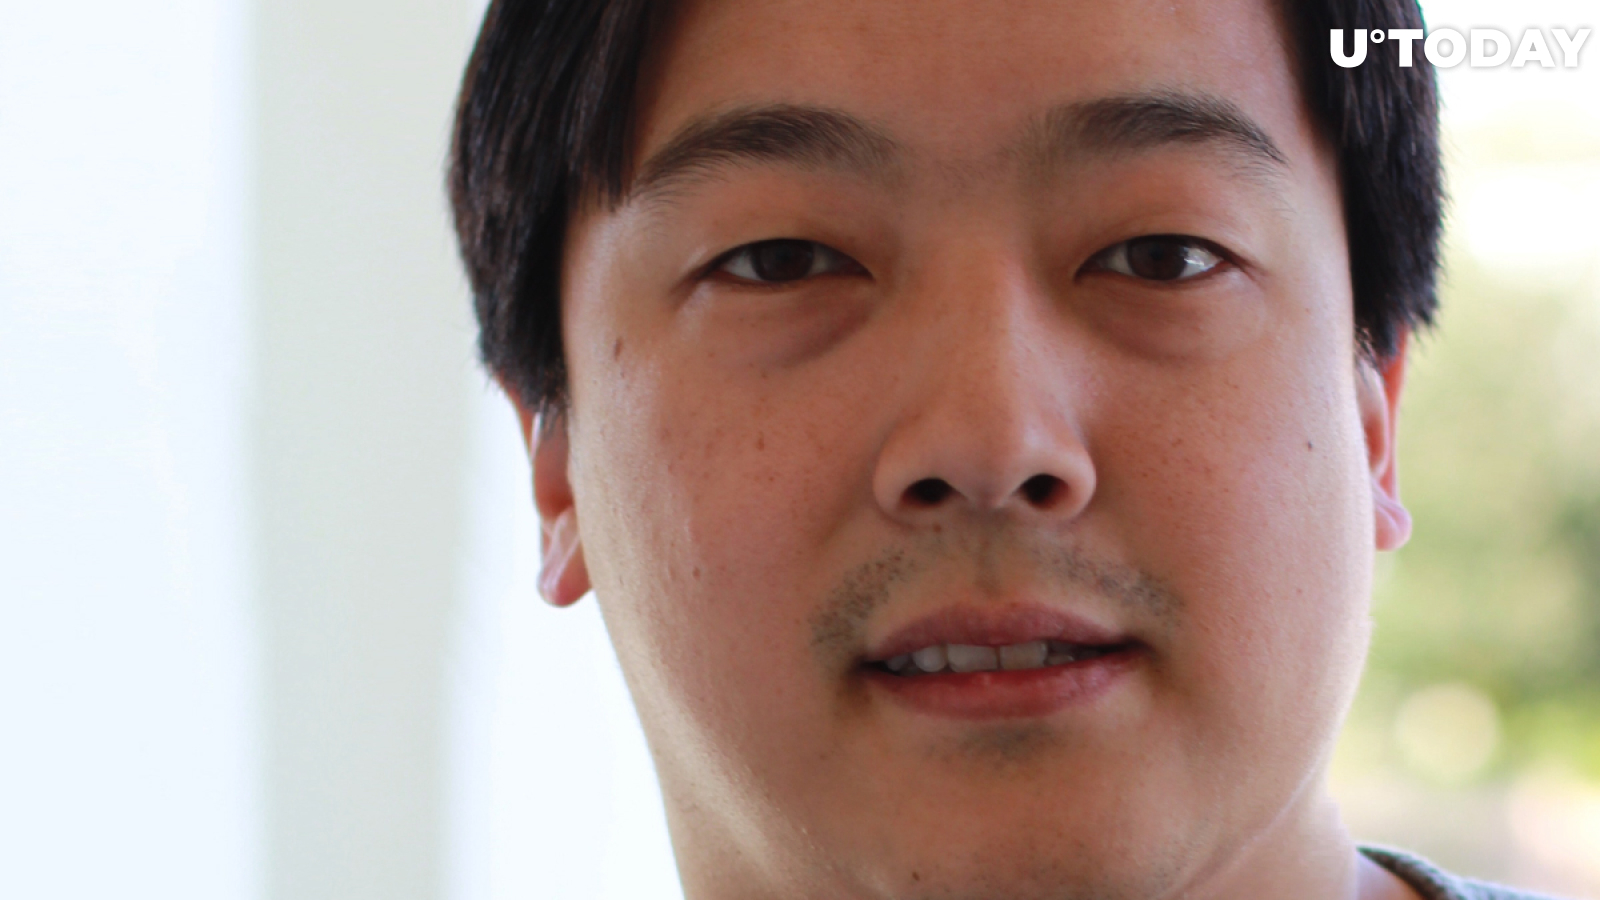 Litecoin's Charlie Lee on Altcoins, ICOs and NFTs: "Few Will Hold, Most Won't"